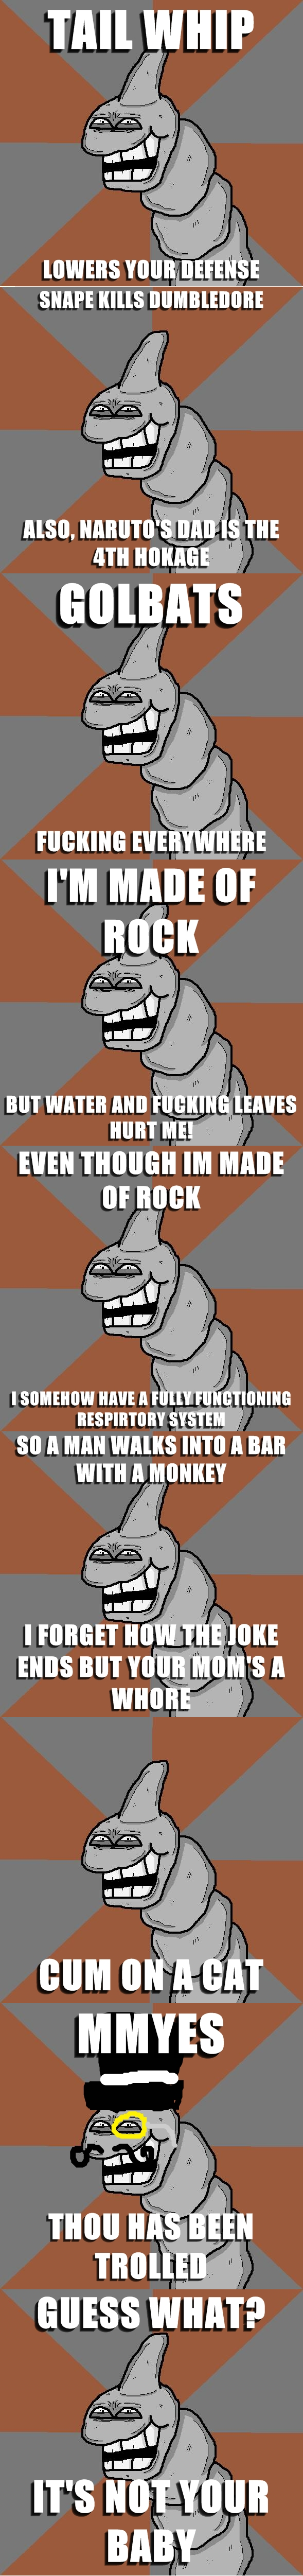 Troll Onix Compiltation 1. I think I accidentally deleted the original one (or forgot to post it) so here it is again. My bad..